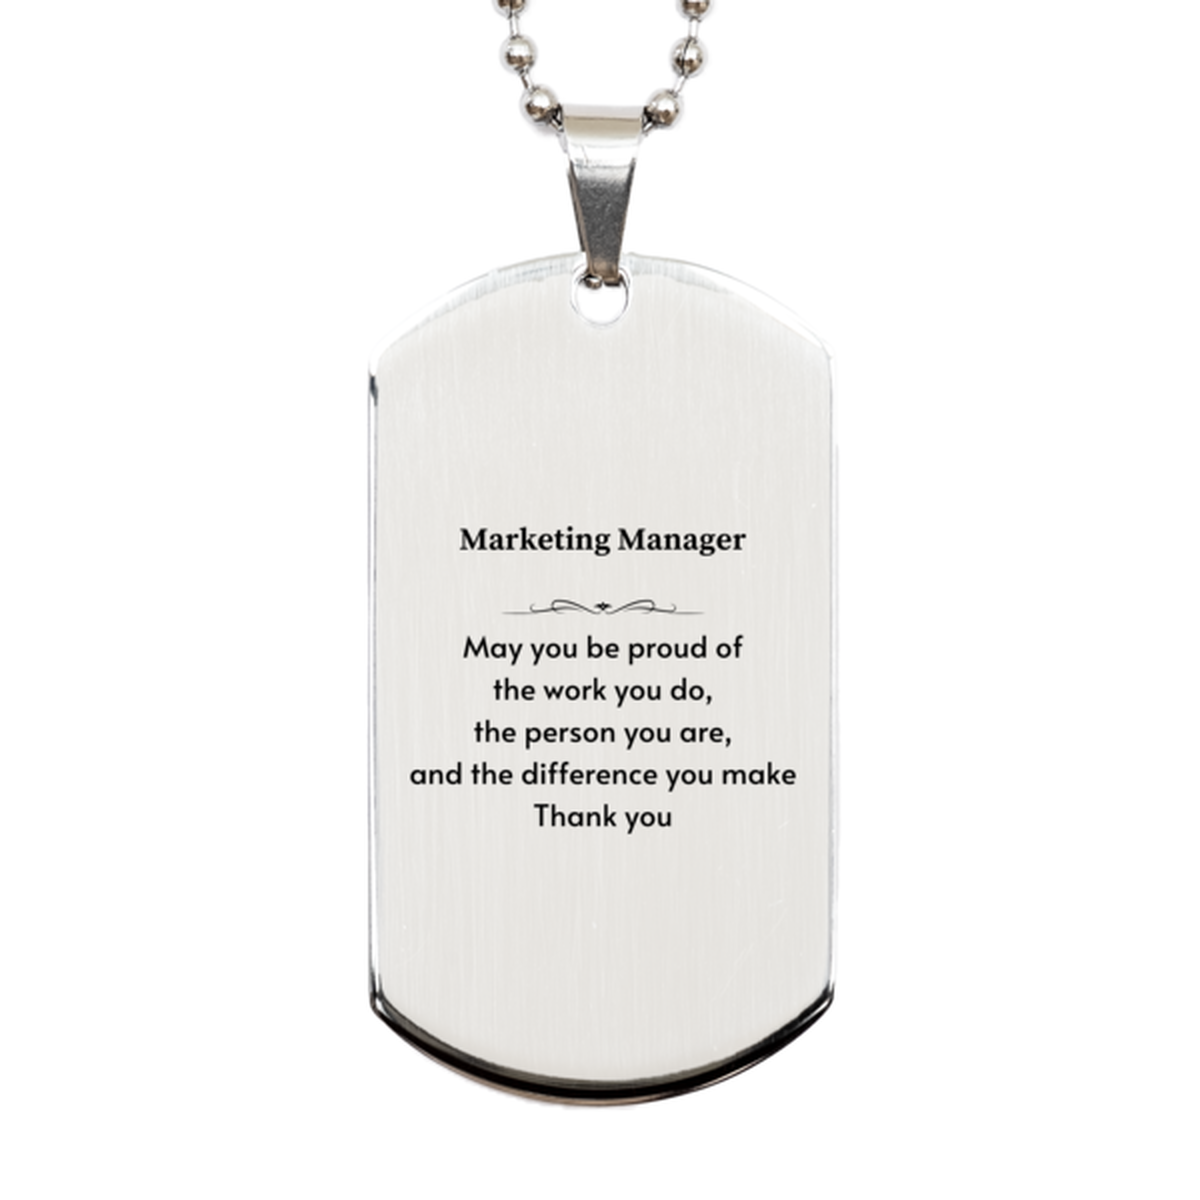 Heartwarming Silver Dog Tag Retirement Coworkers Gifts for Marketing Manager, Marketing Manager May You be proud of the work you do, the person you are Gifts for Boss Men Women Friends